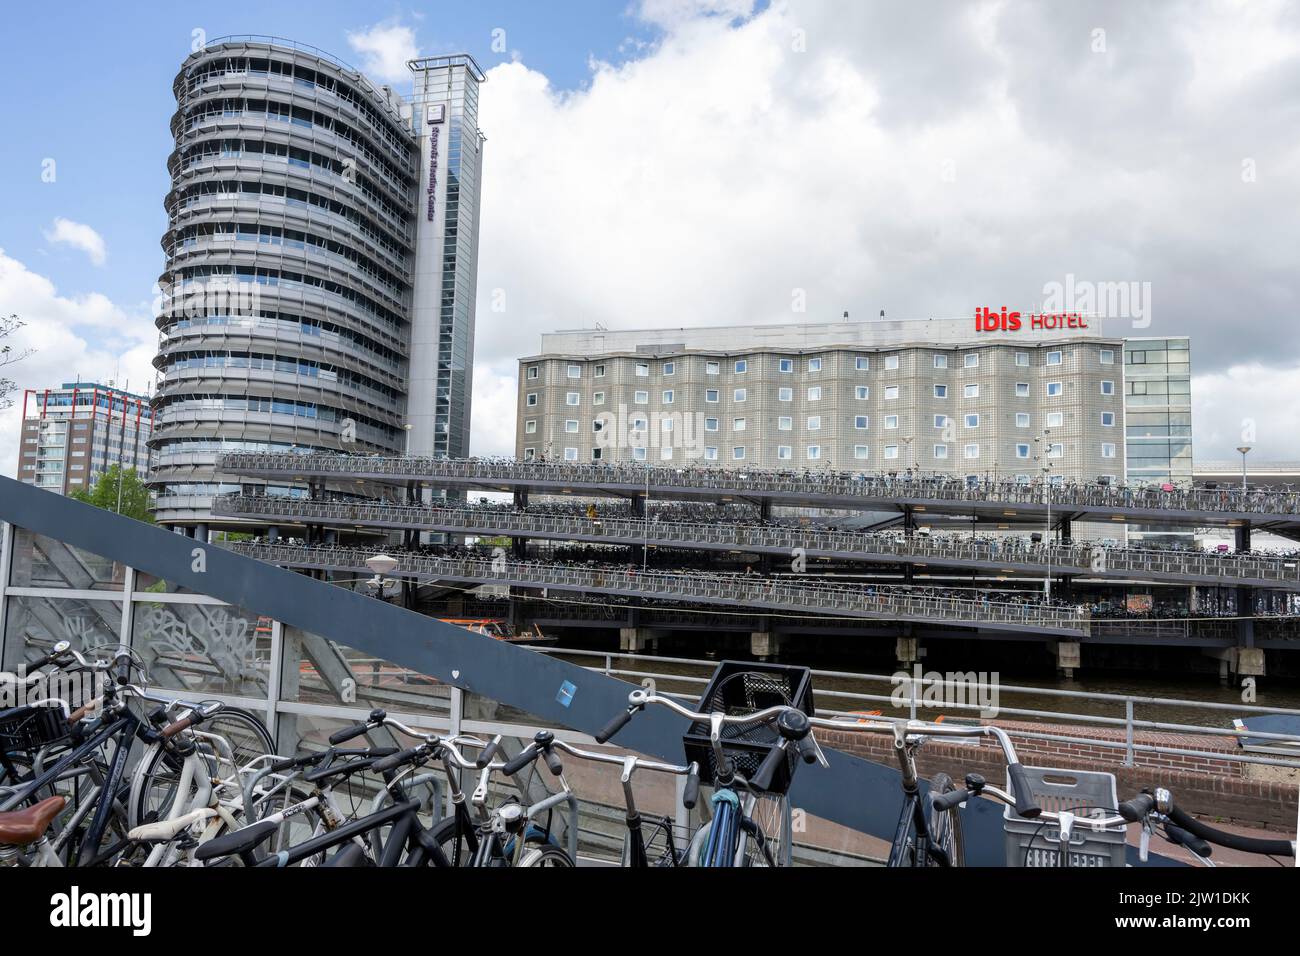 A general view of an Ibis hotel in Amsterdam, Holland. Stock Photo